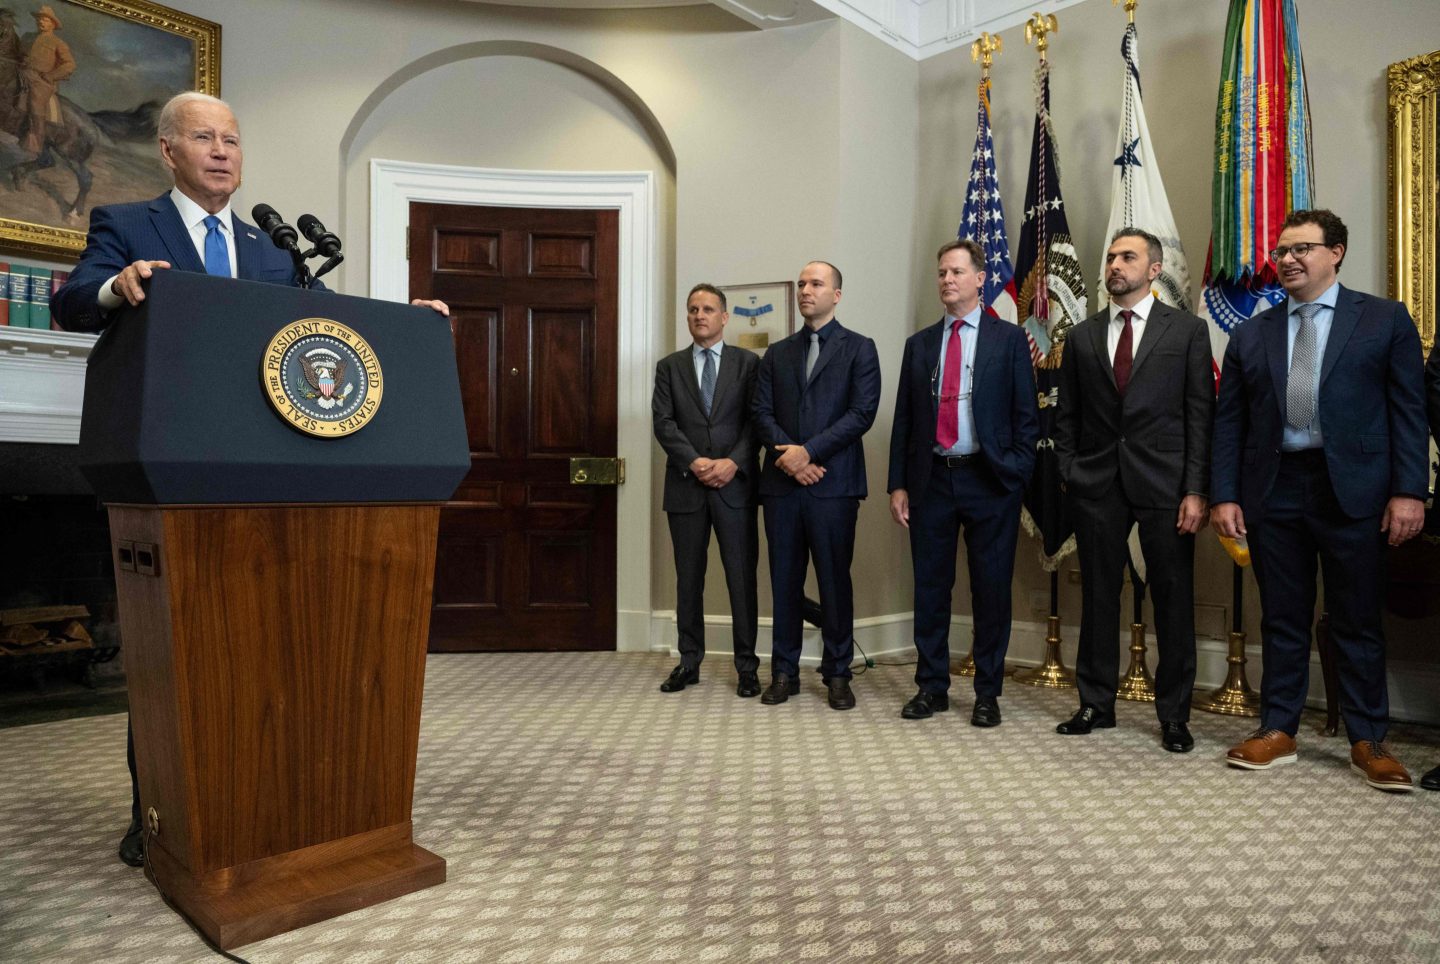 President Biden speaks at a podium in the White House while representatives from seven leading A.I. companies stand by watching.